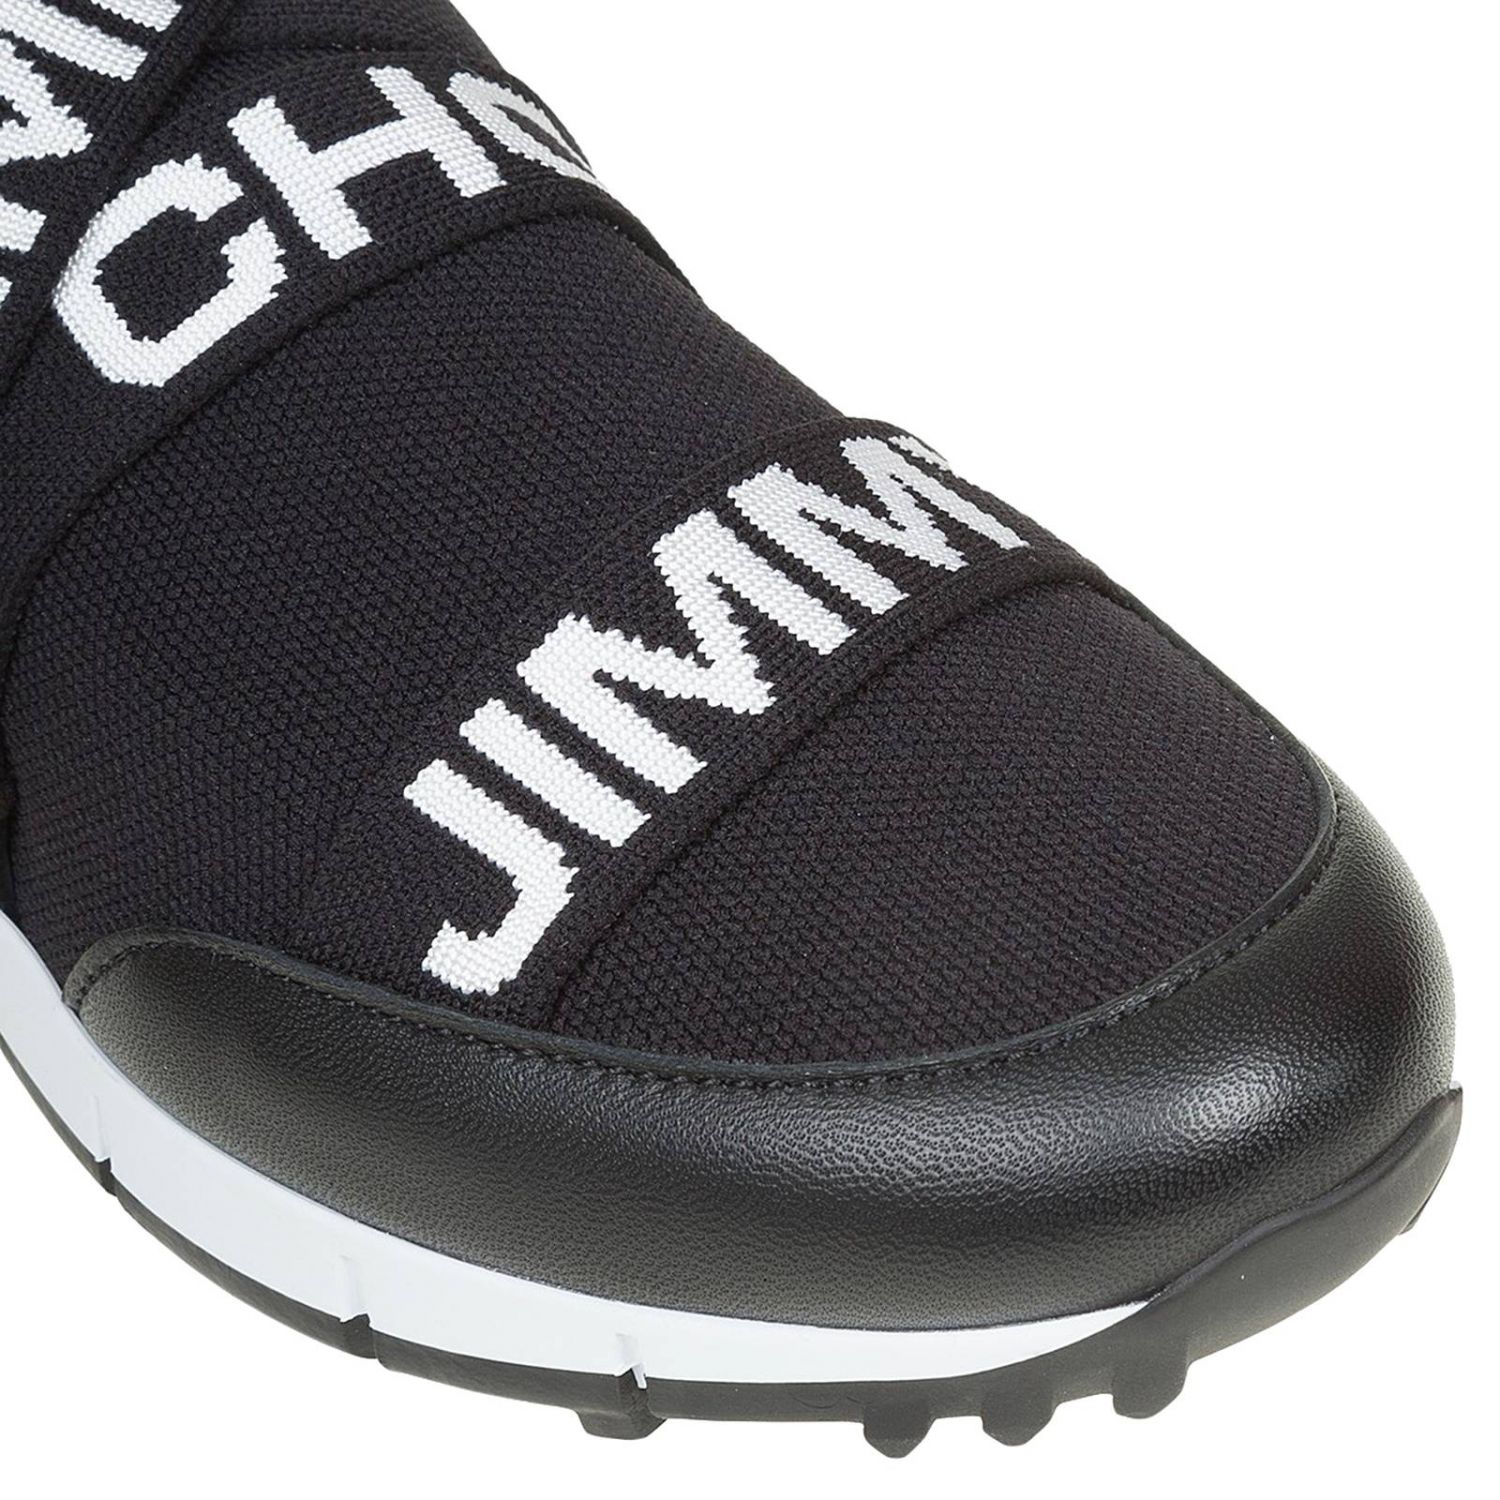 Jimmy Choo Outlet: Toronto slip on sneakers in breathable technical